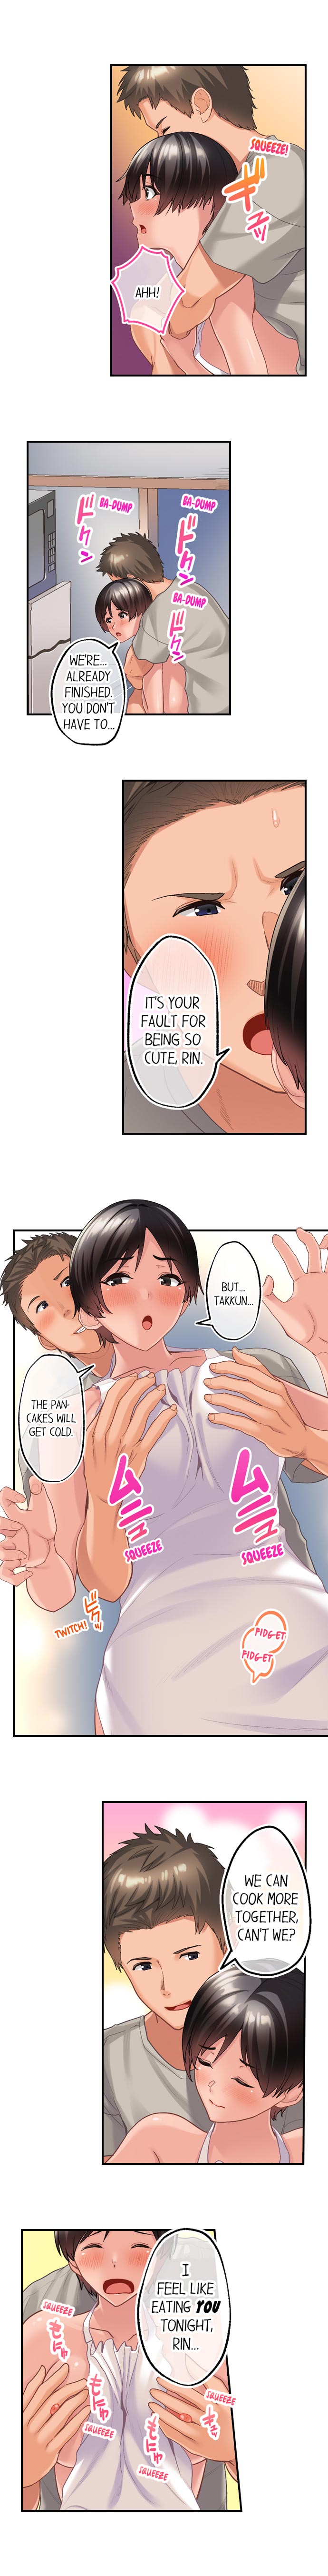 Using 100 Boxes of Condoms With My Childhood Friend! - Chapter 11 Page 5